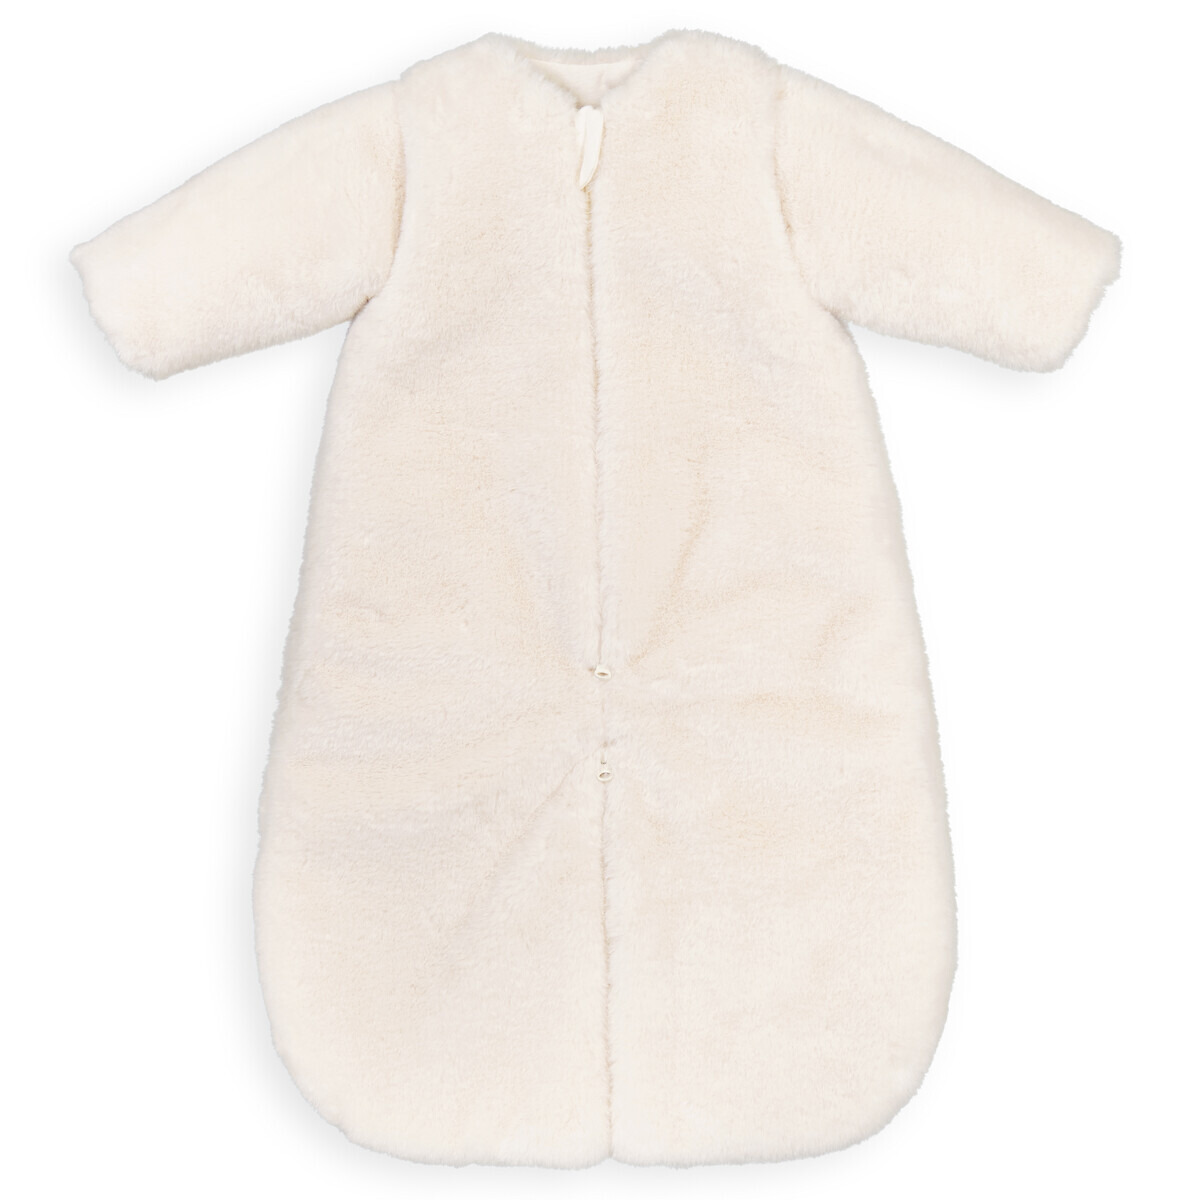 Sleep Suit with Removable Arms and Separate Legs - image 1